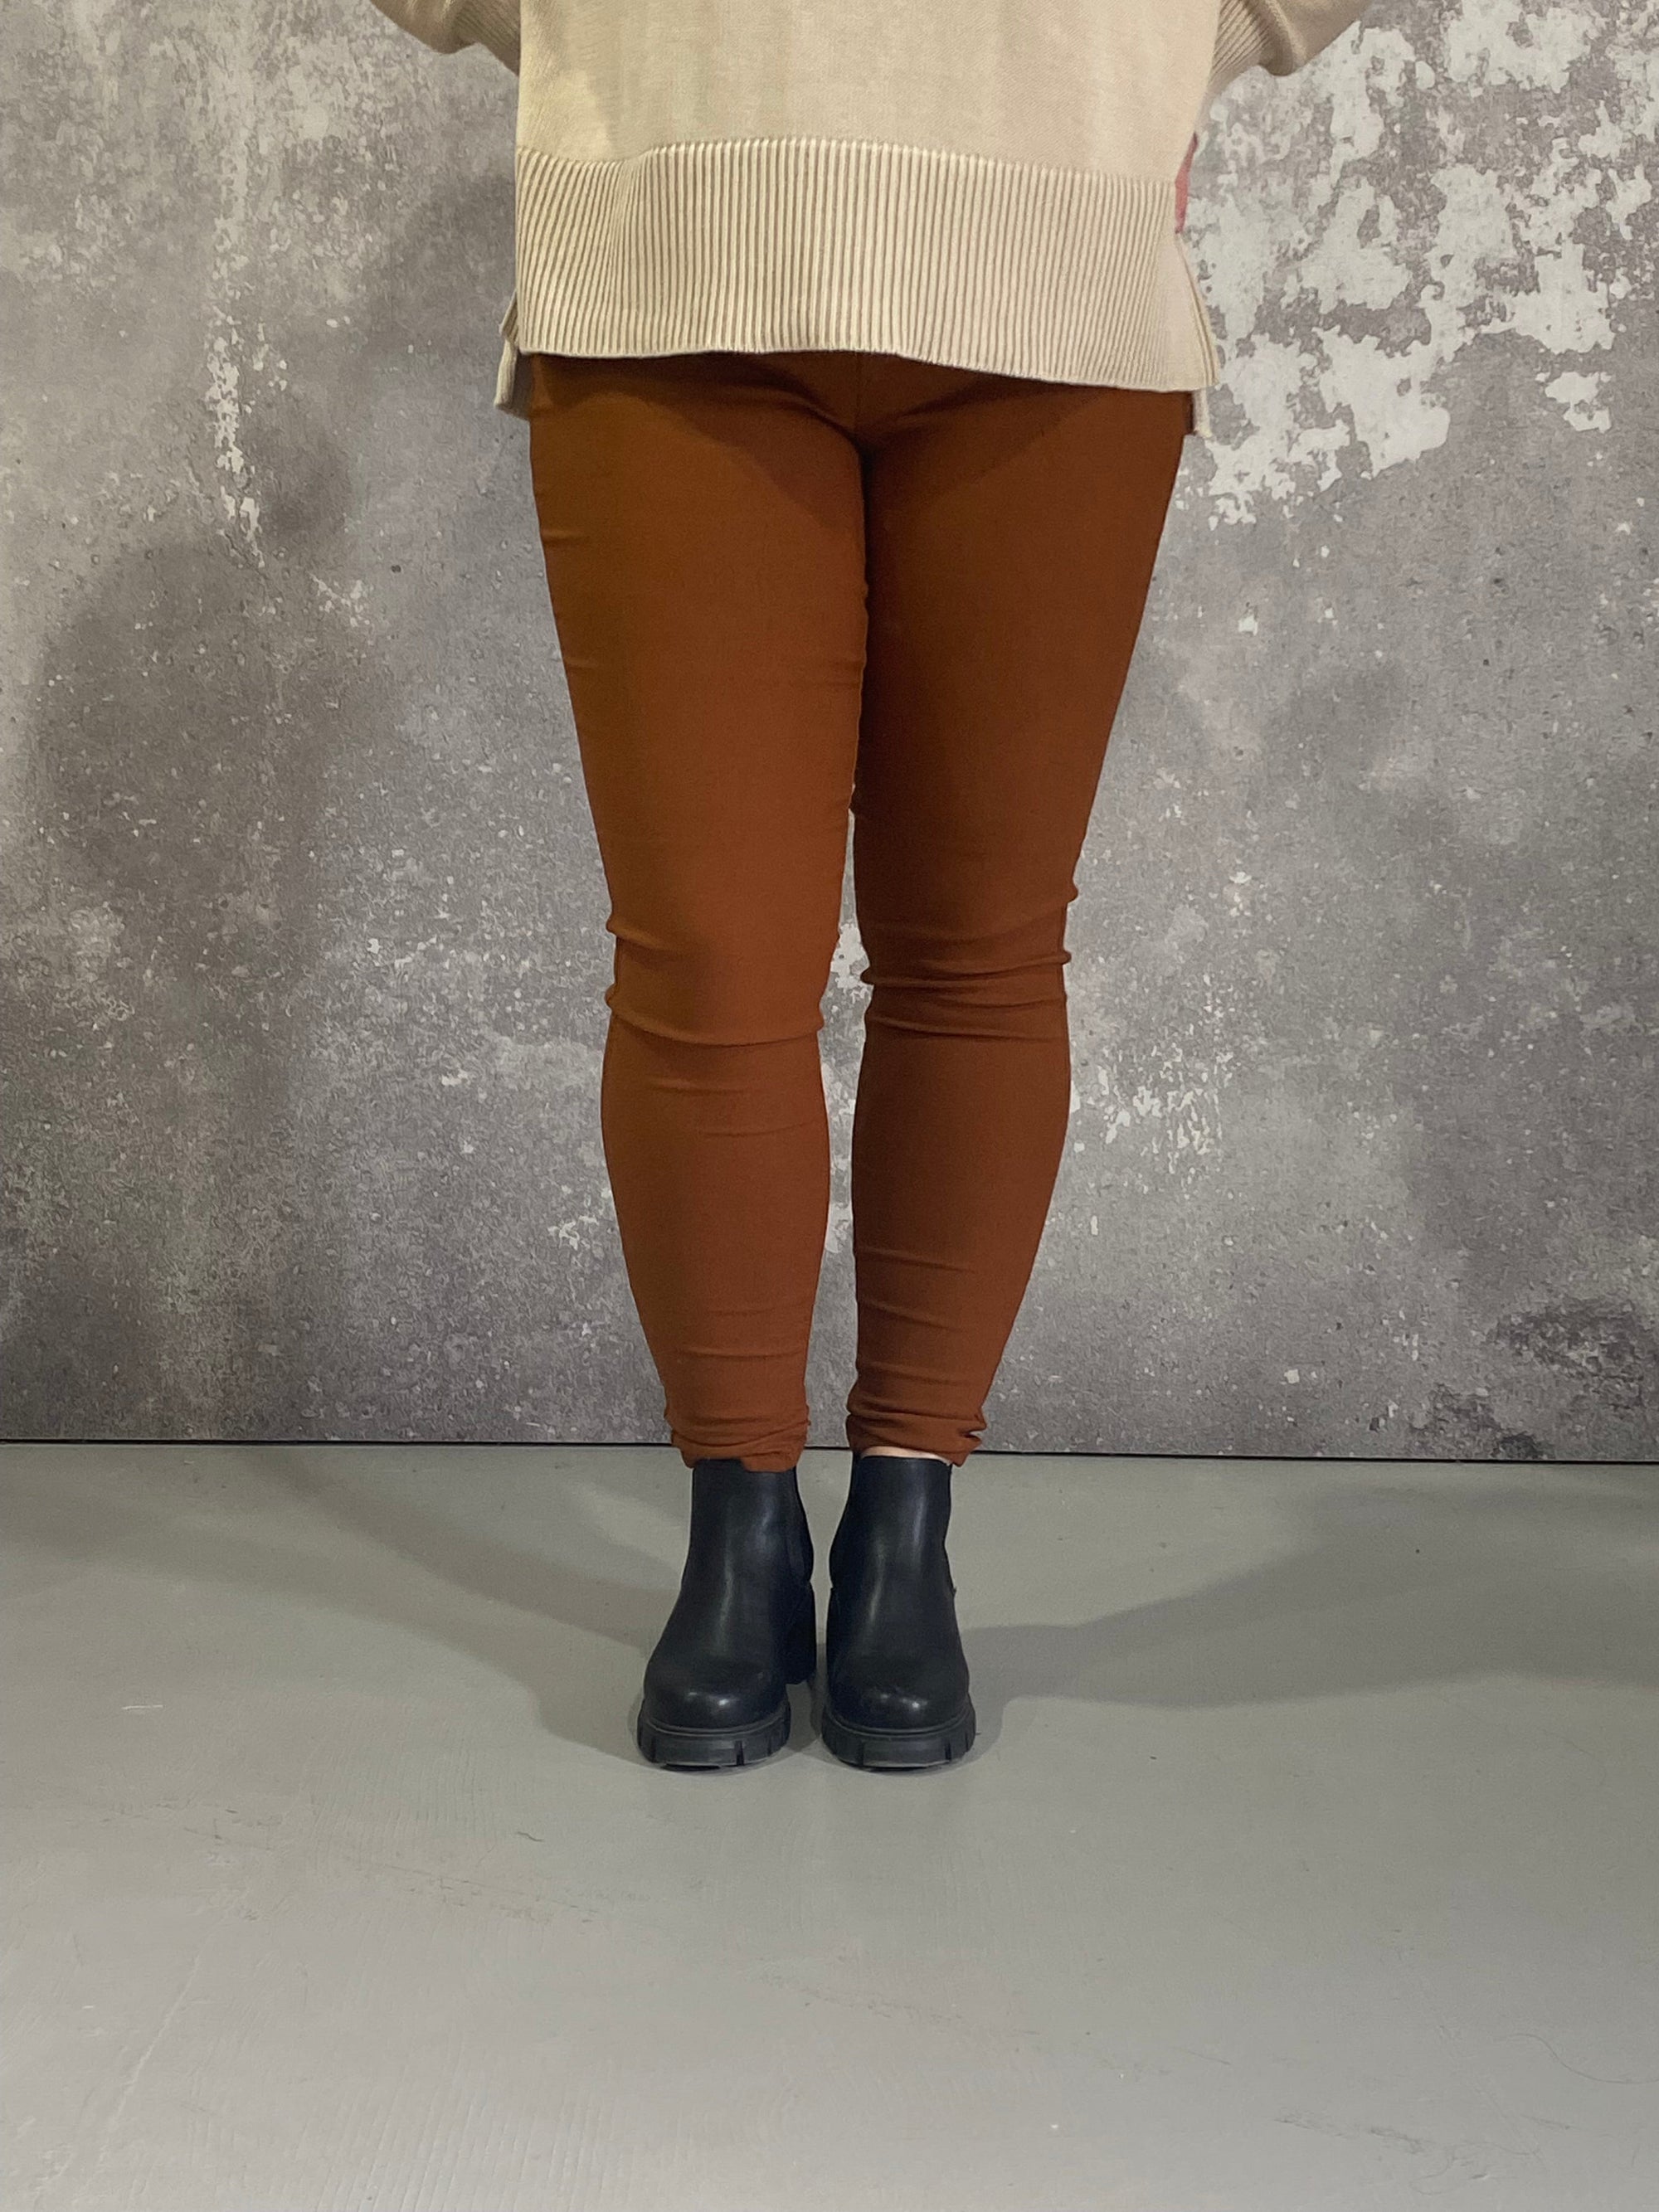 Hyperstretch Colored Skinny Mid rise Pant - Copper (Small - 3X) FINAL SALE